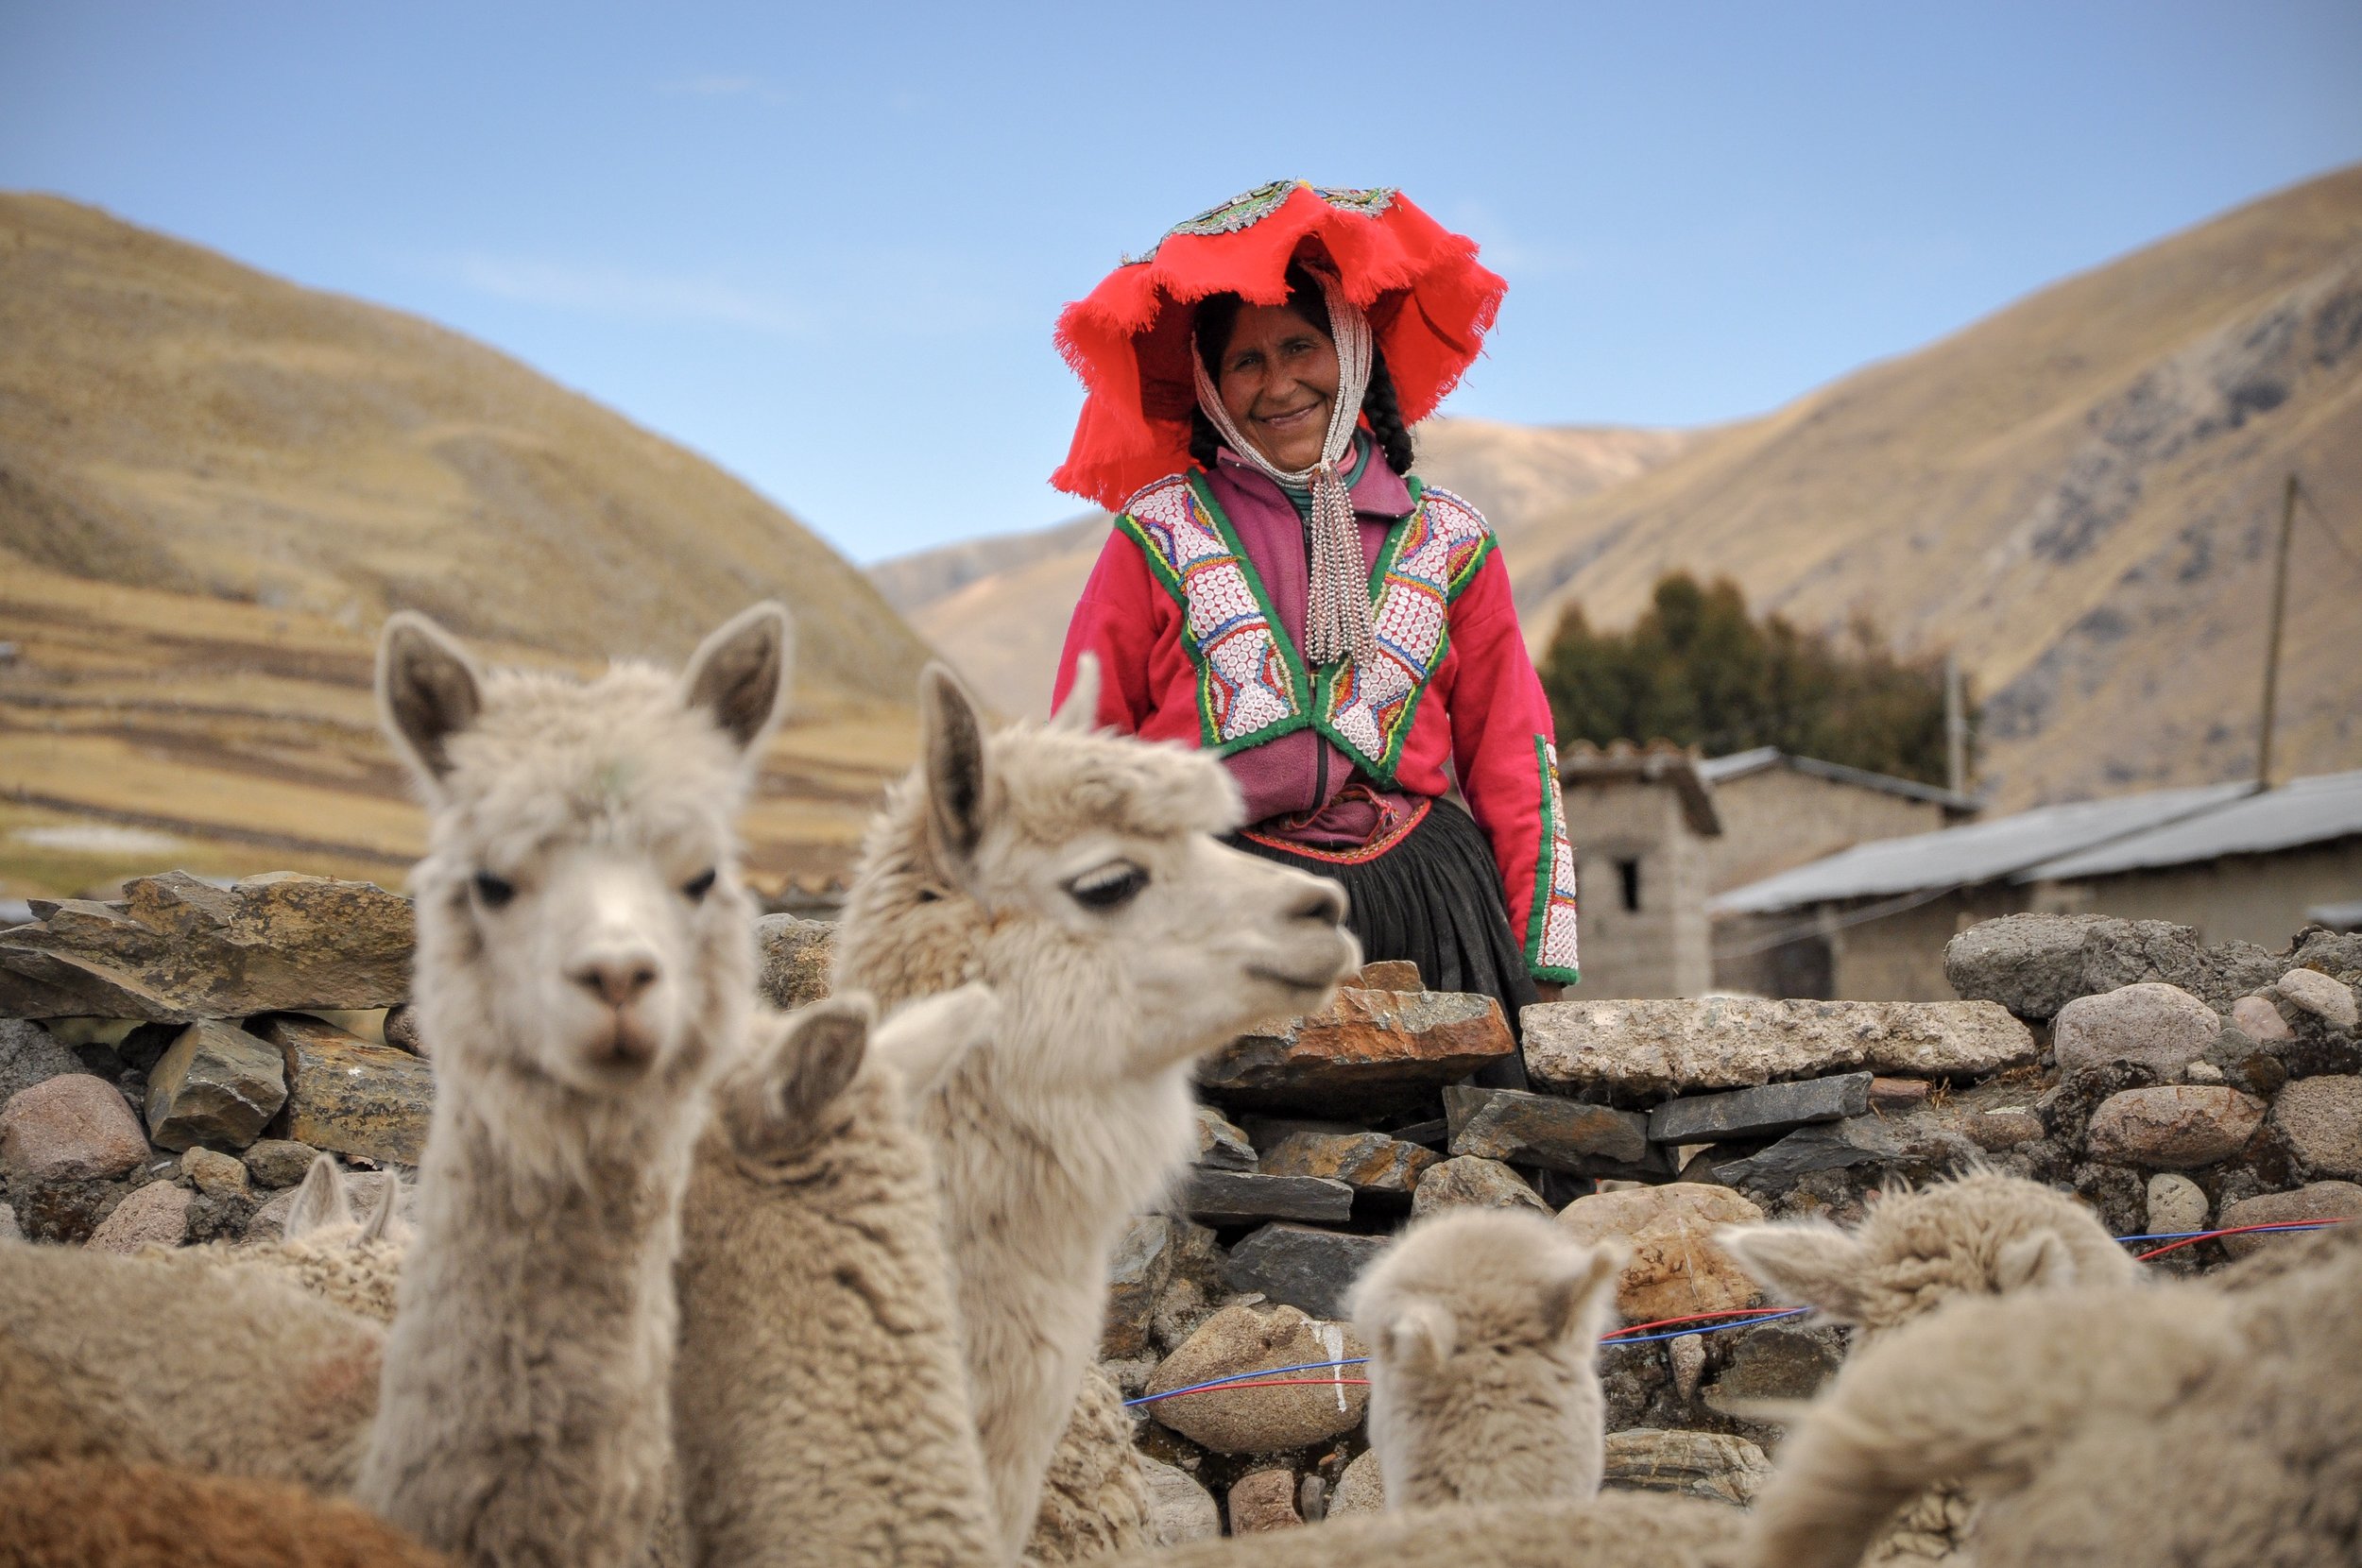 Our artisans work mostly with Huacaya alpaca, as they adapt easily to the extreme climate at 13,000 ft.